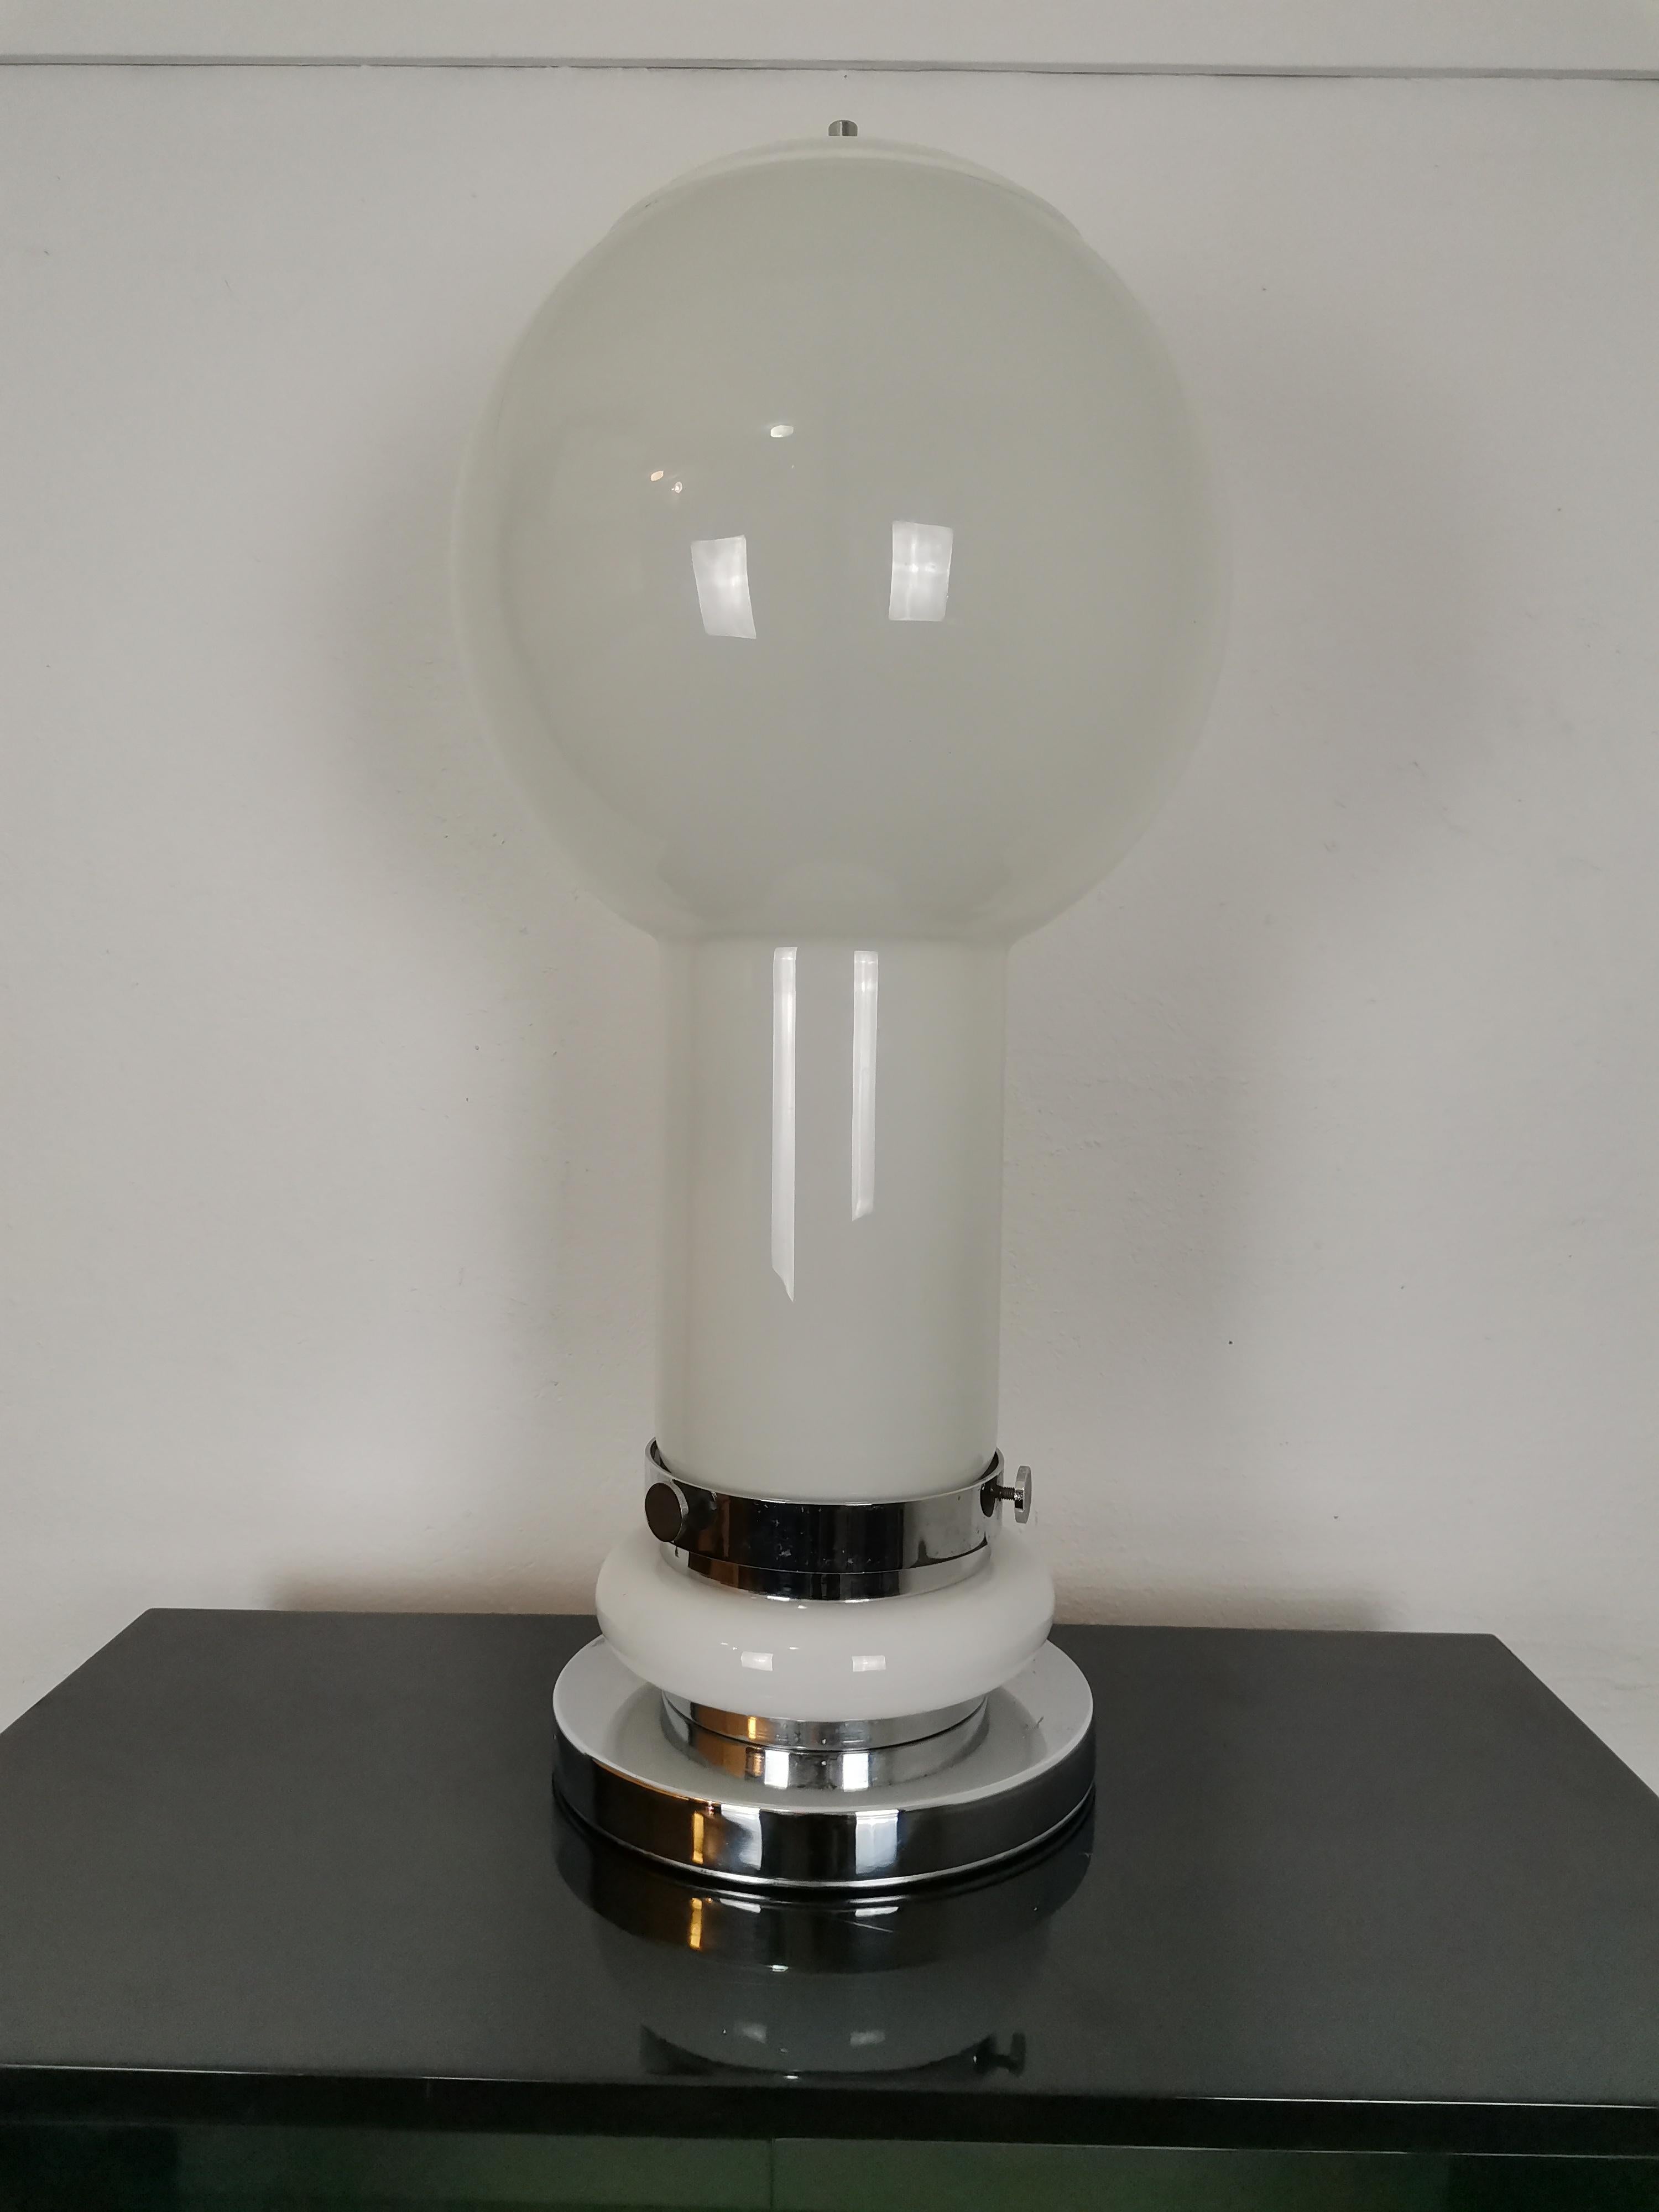 Vintage Italian table lamp in white opaline glass, 1970s.

Period: 1960s

Style: Space Age, Mid-Century Modern

Materials: glass, plastic cap, chromed parts

Condition: Excellent original vintage condition, some traces of use and time, fully